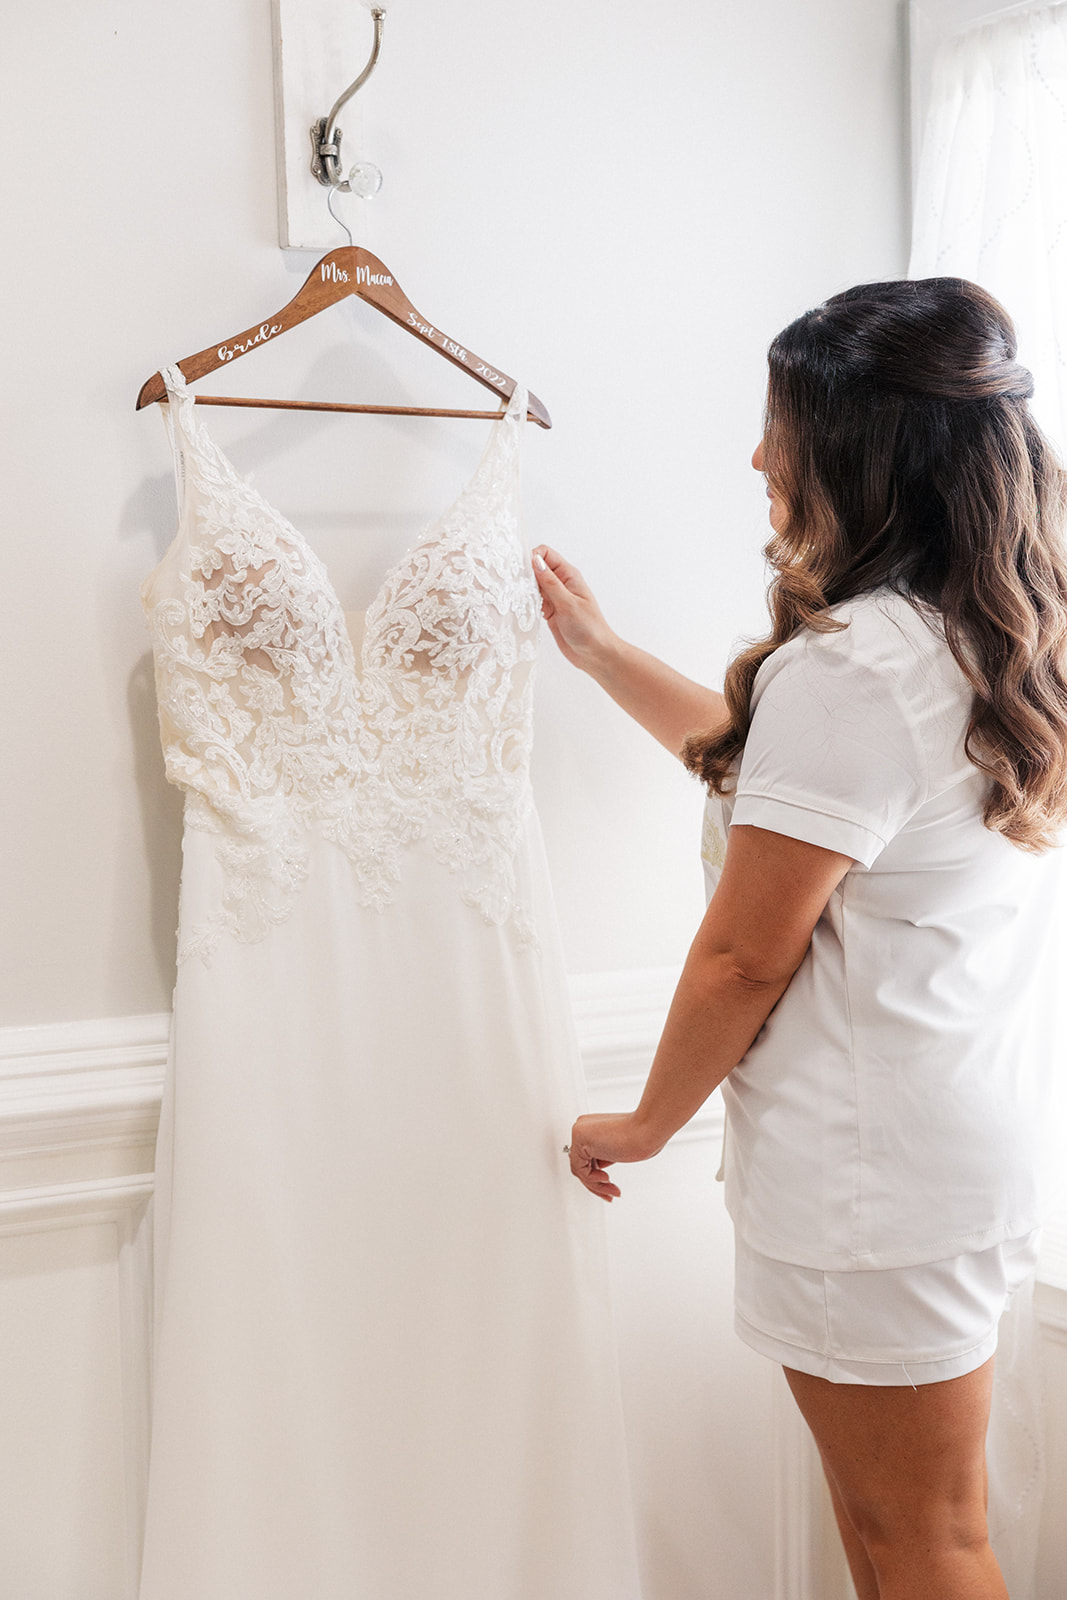 A bride looks at her lace wedding dress handing on a wall by a window